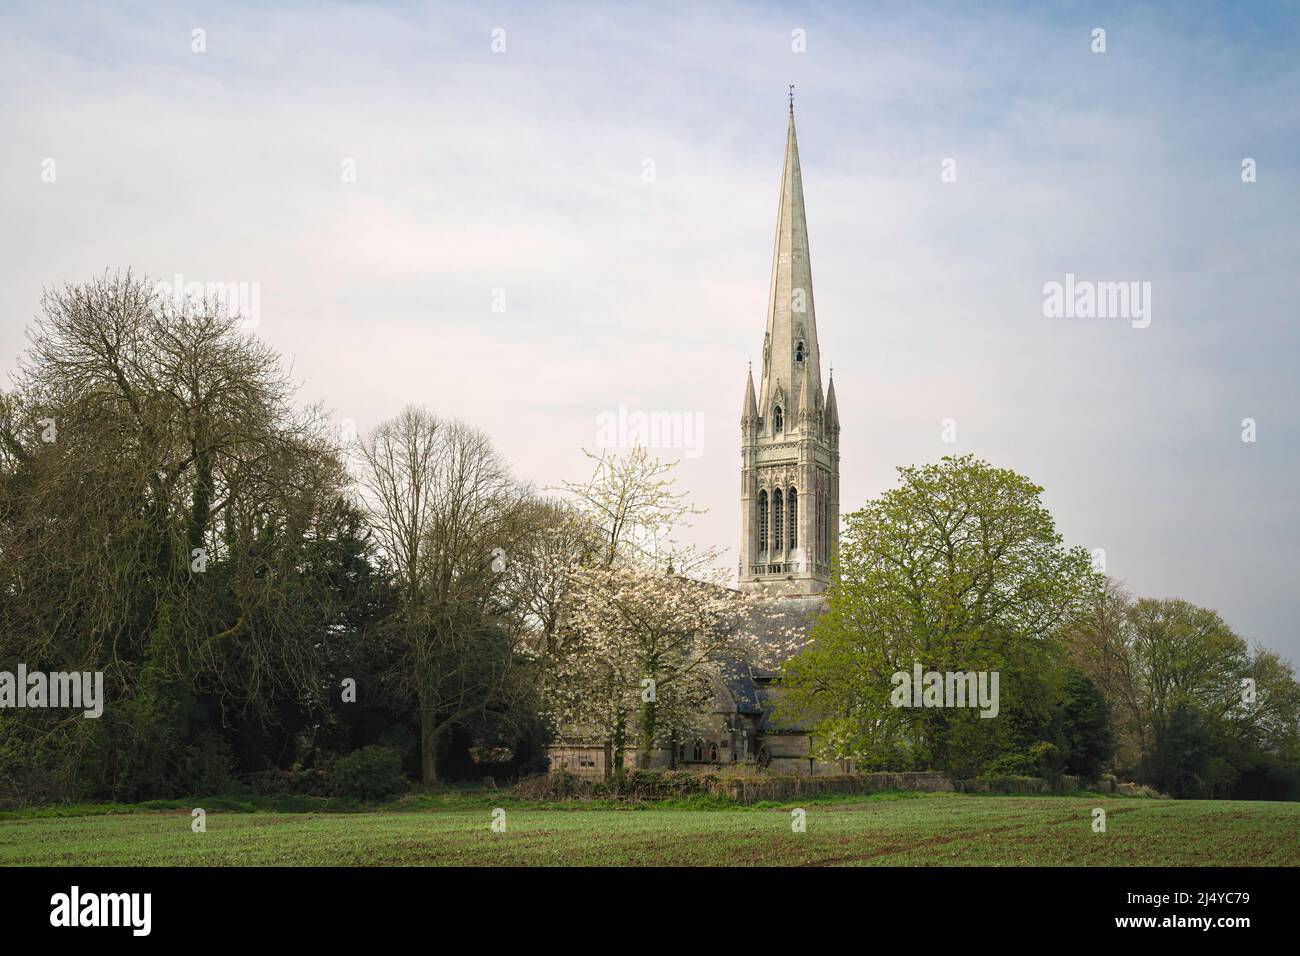 St Mary's Church flanked by trees, some with spring blossom, and field all under bright blue sky on a fine morning in South Dalton, Beverley, UK. Stock Photo